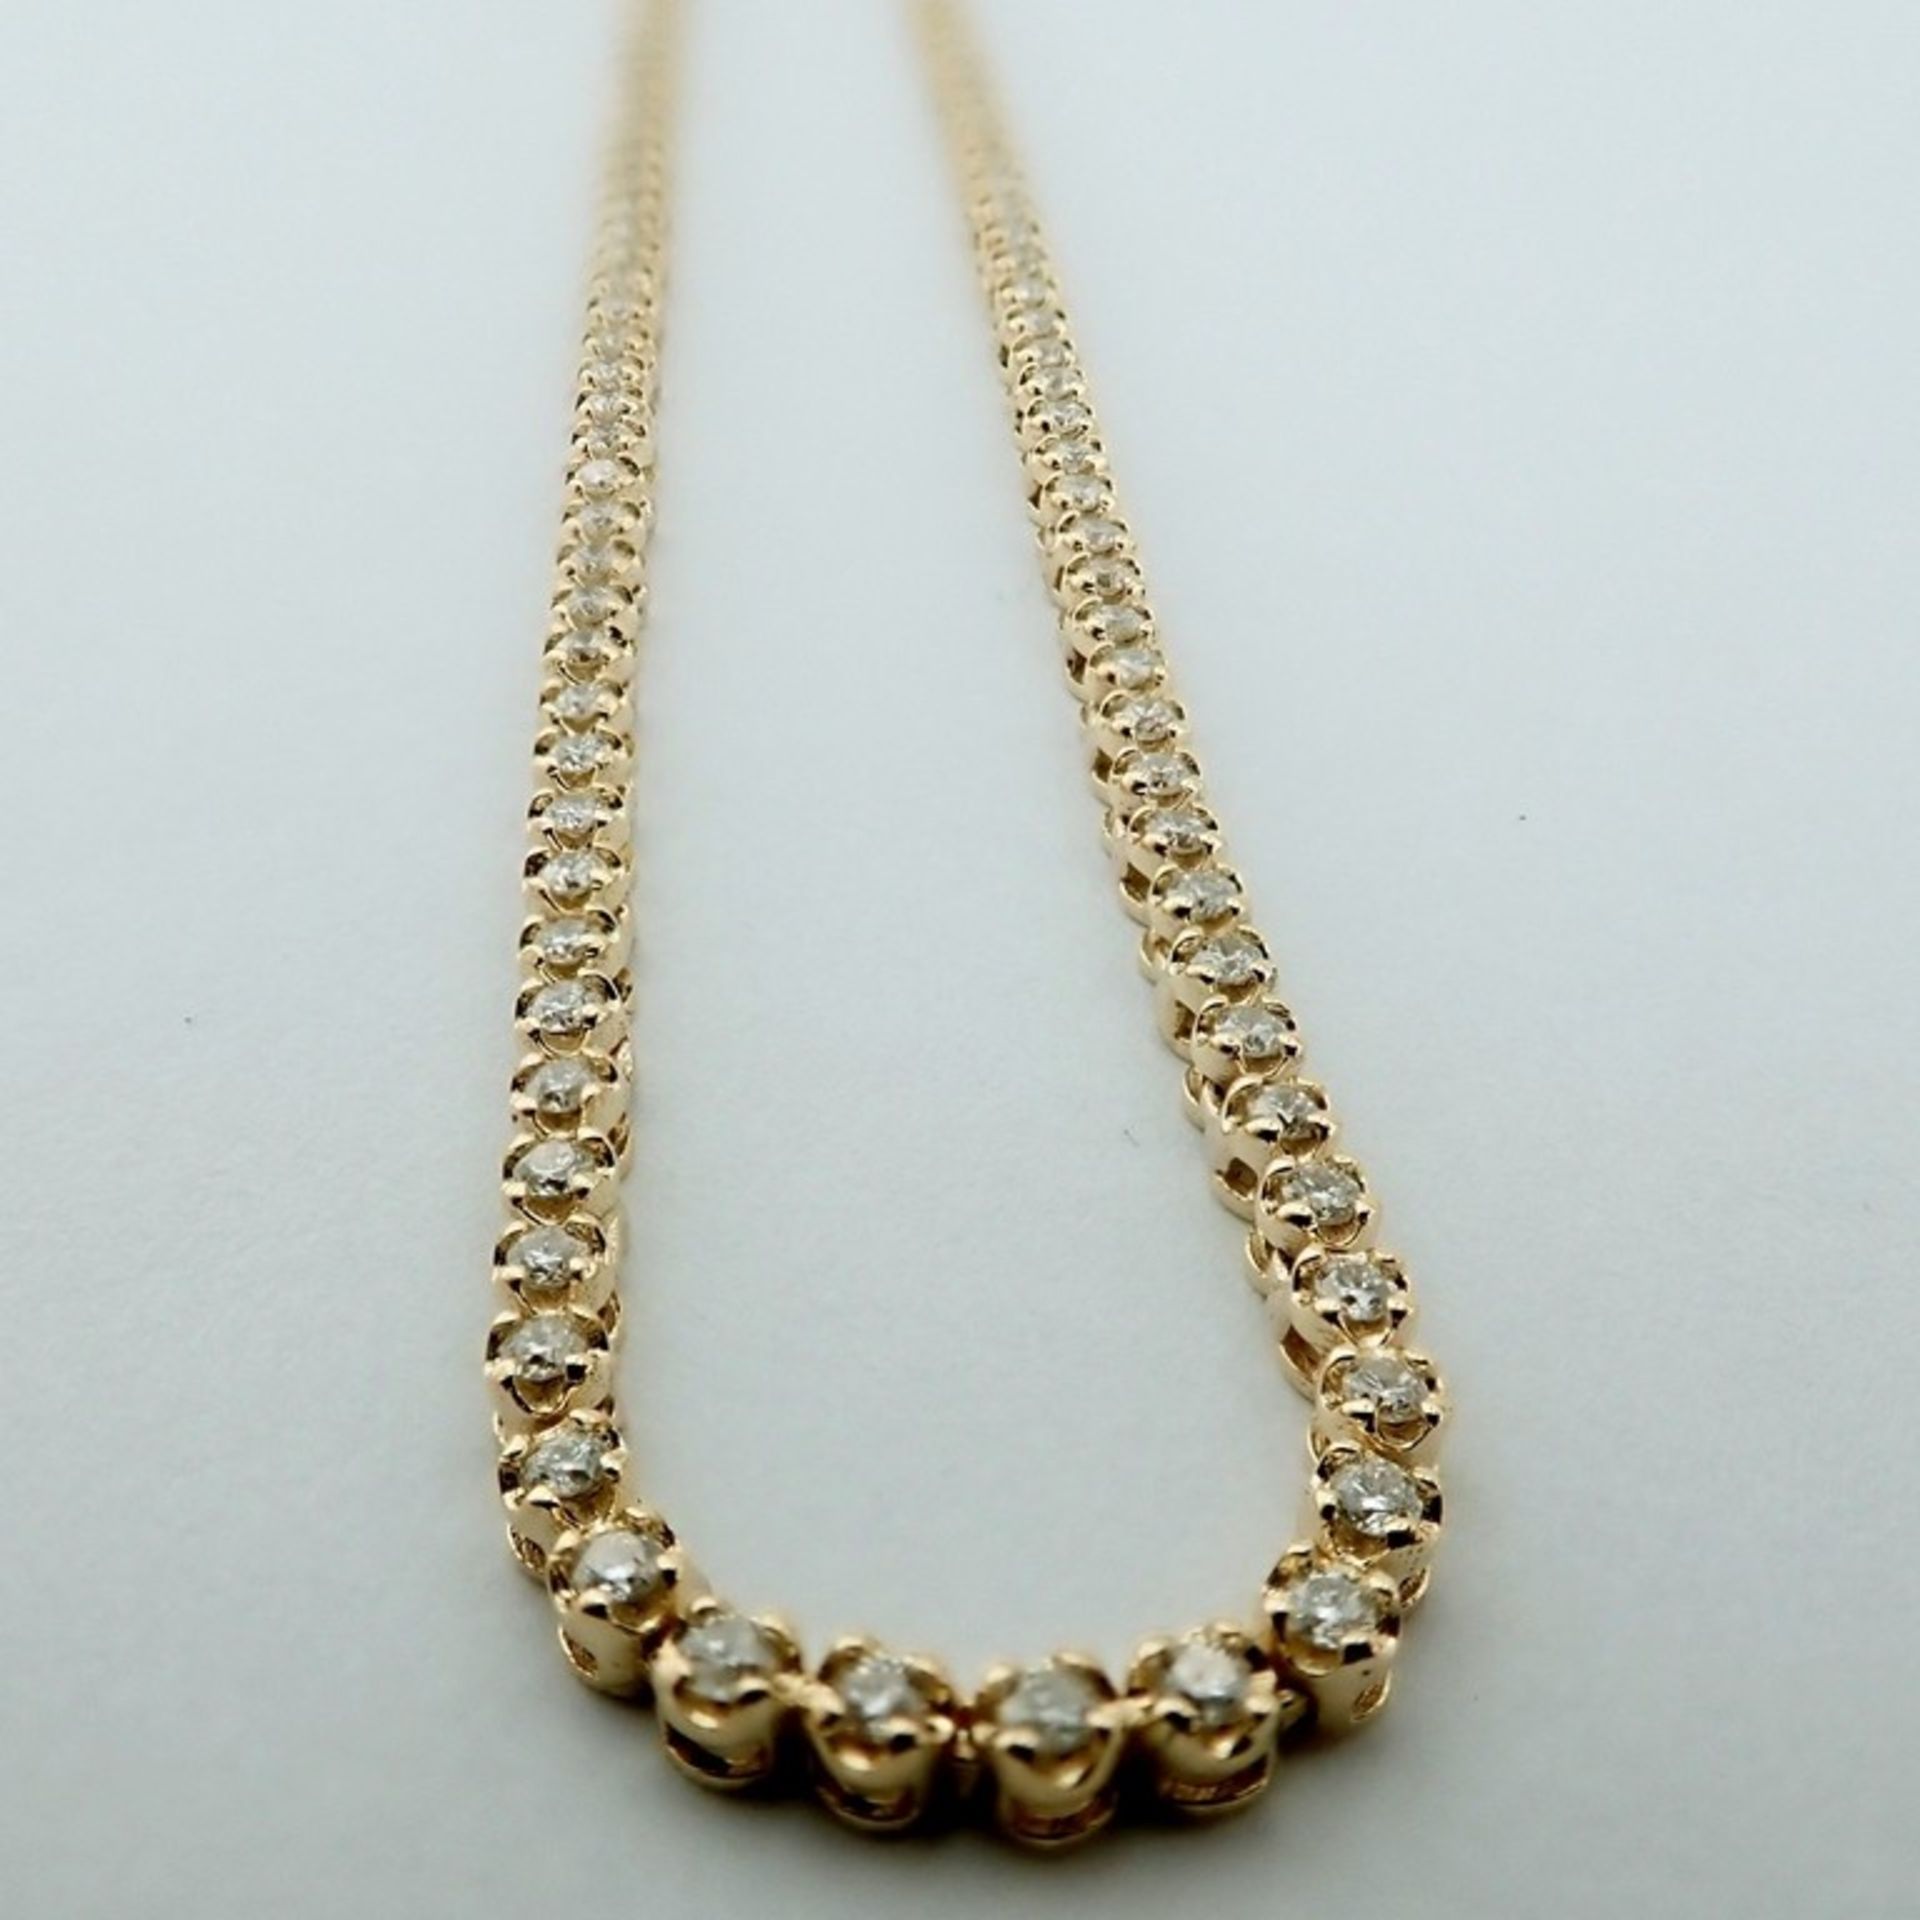 Certificated 14K Yellow Gold Diamond Necklace - Image 2 of 5